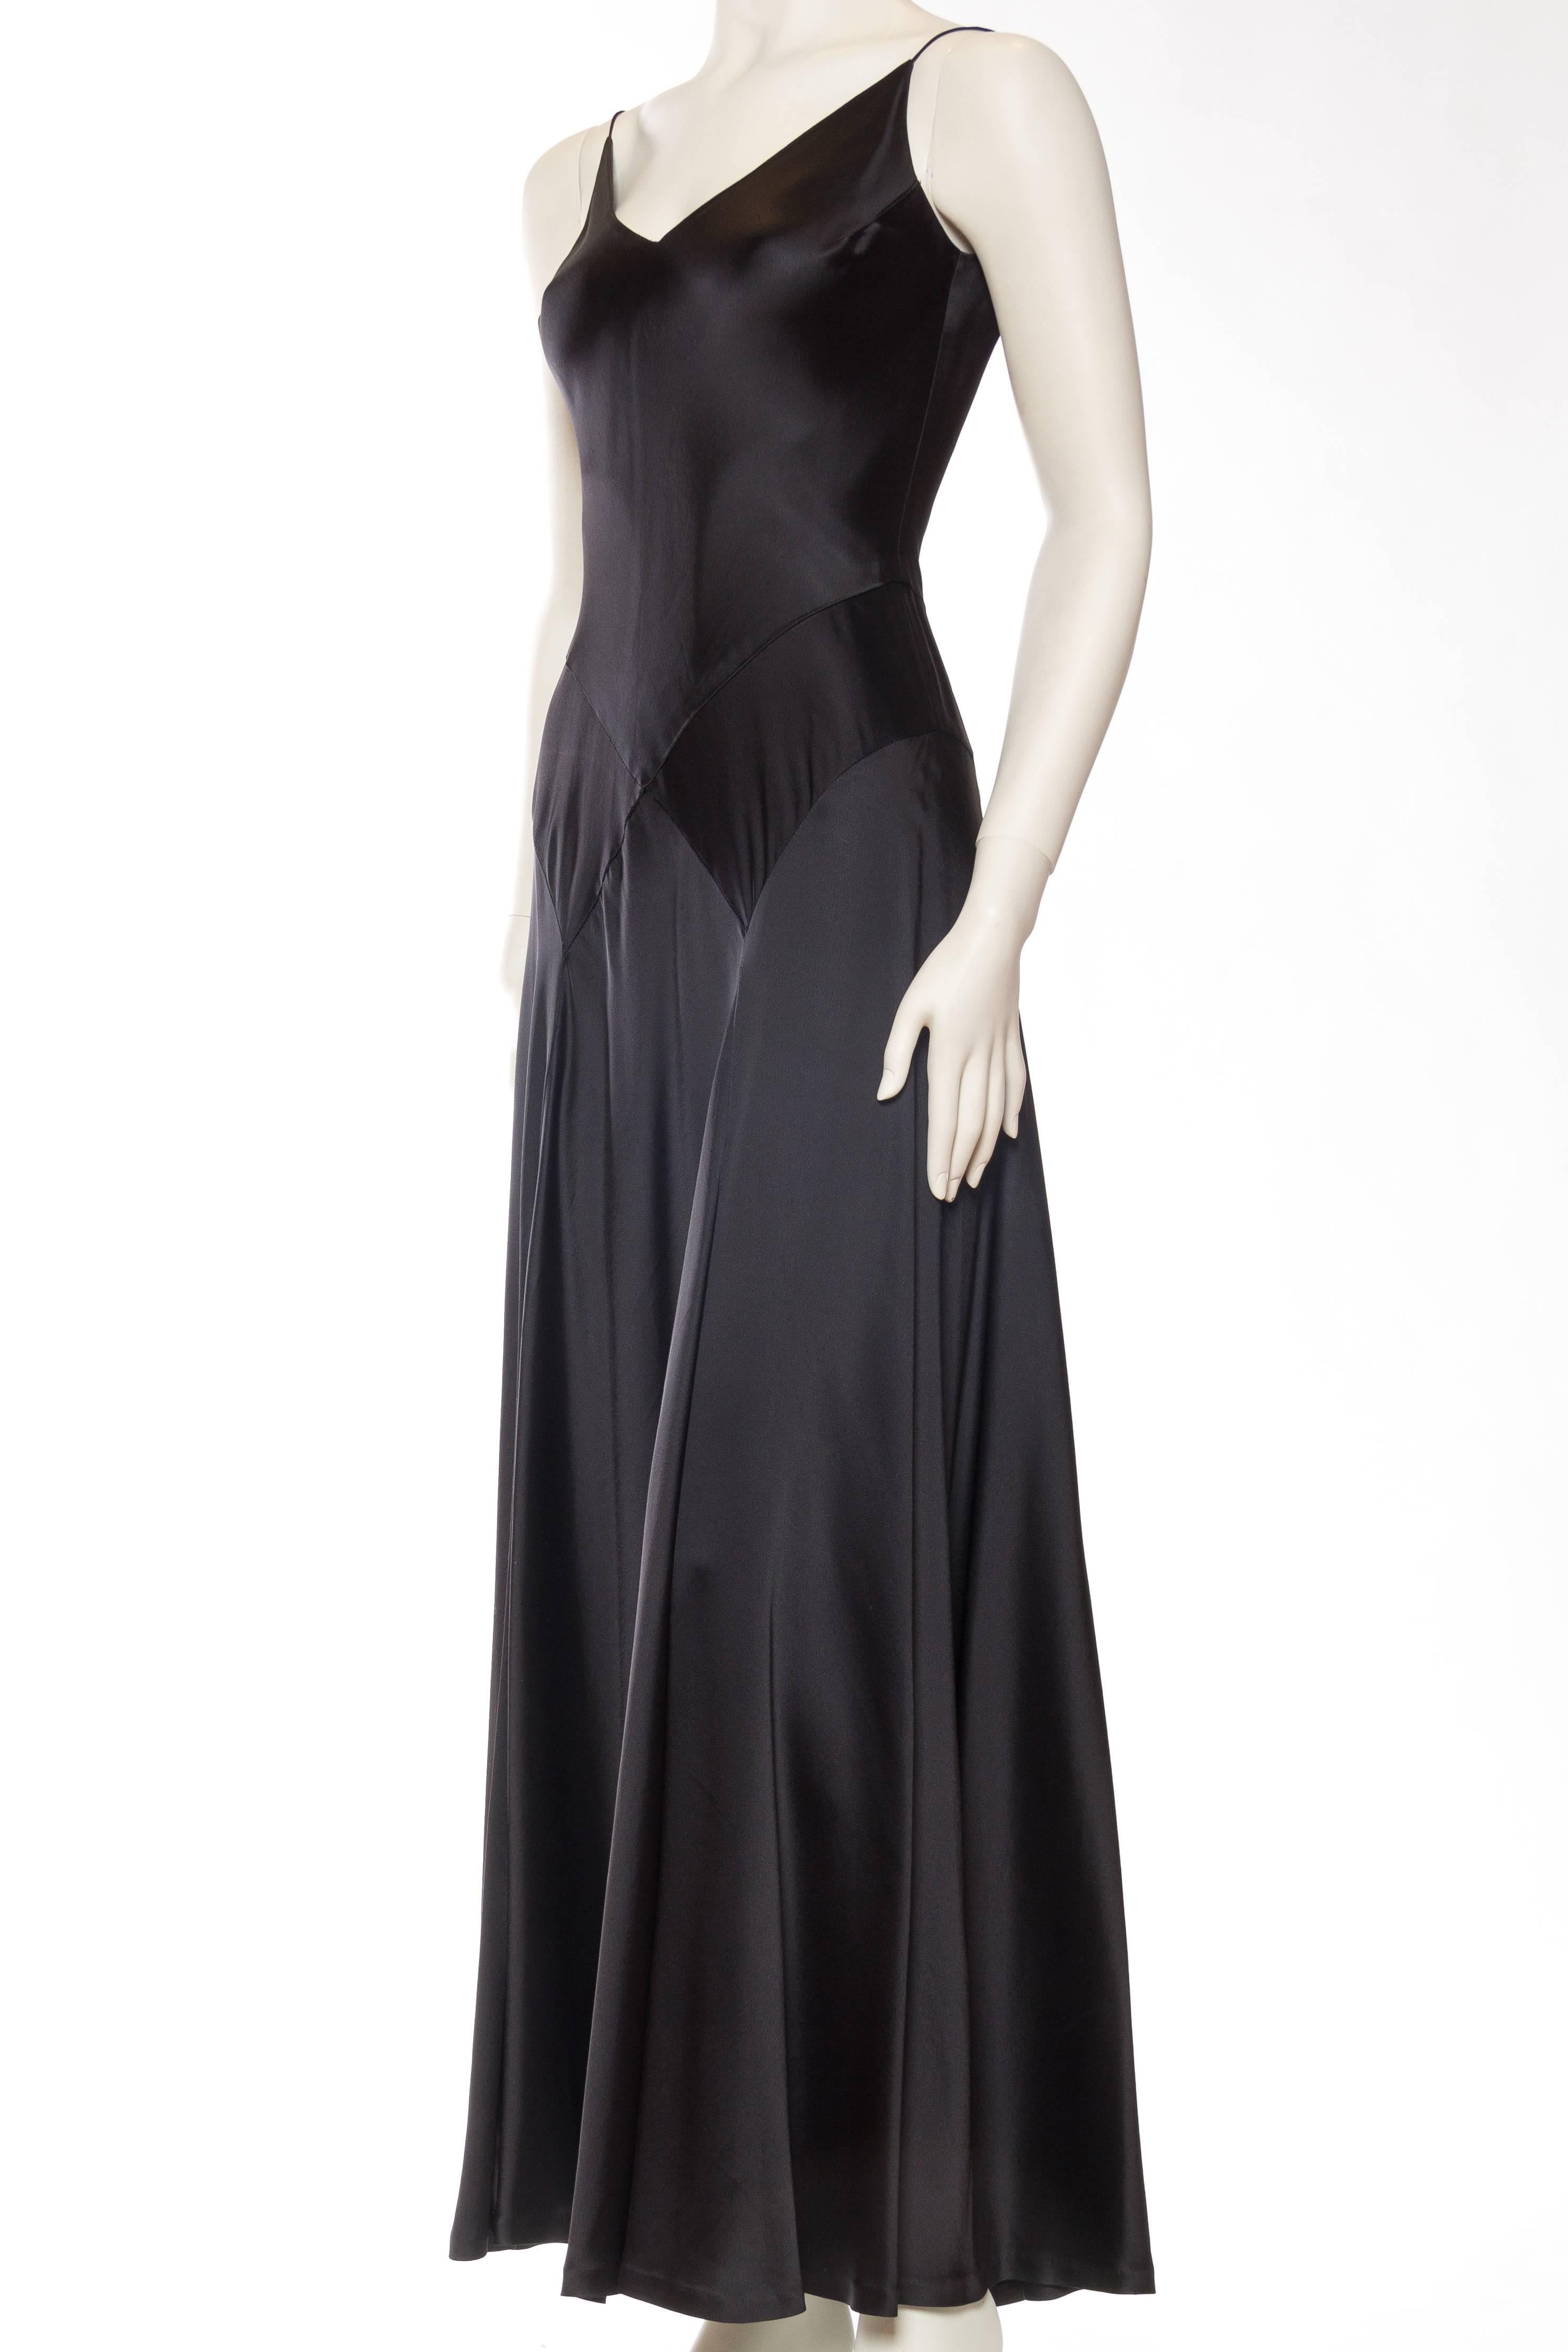 1990S CARMEN MARC VALVO Black Silk Crepe Back Satin Slinky Perfection In A Bias In Excellent Condition For Sale In New York, NY